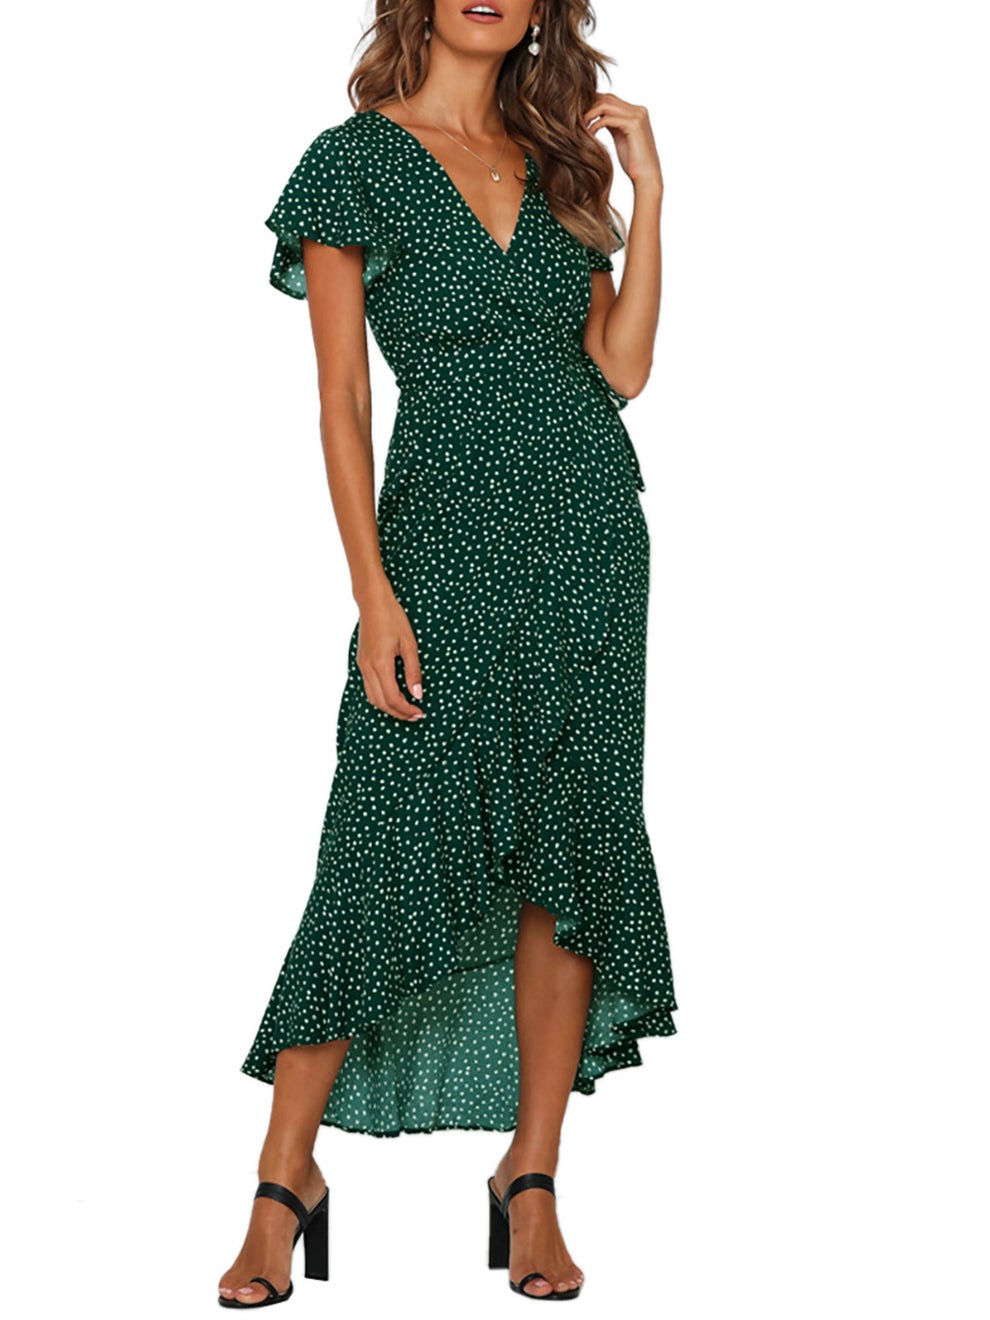 29 Dresses From Walmart That Are Perfect For Teachers